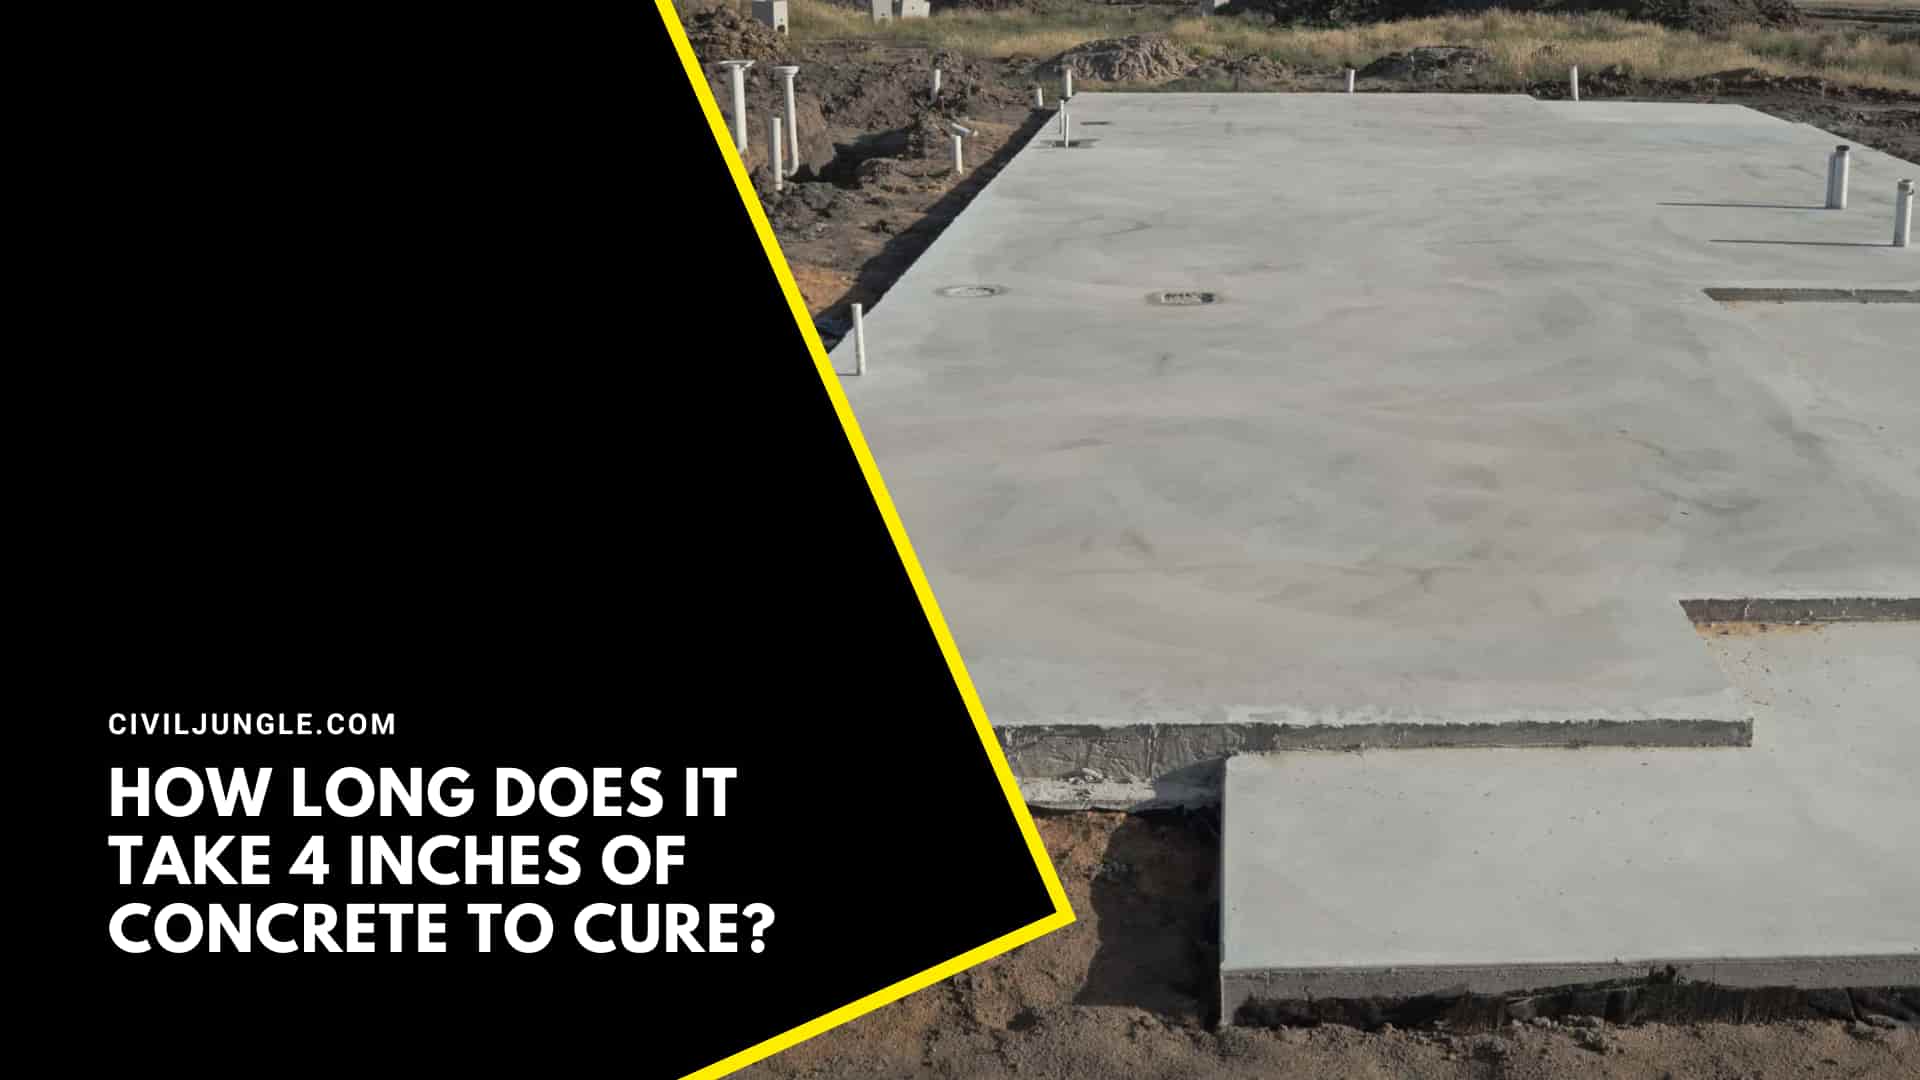 How Long Does It Take 4 Inches of Concrete to Cure?